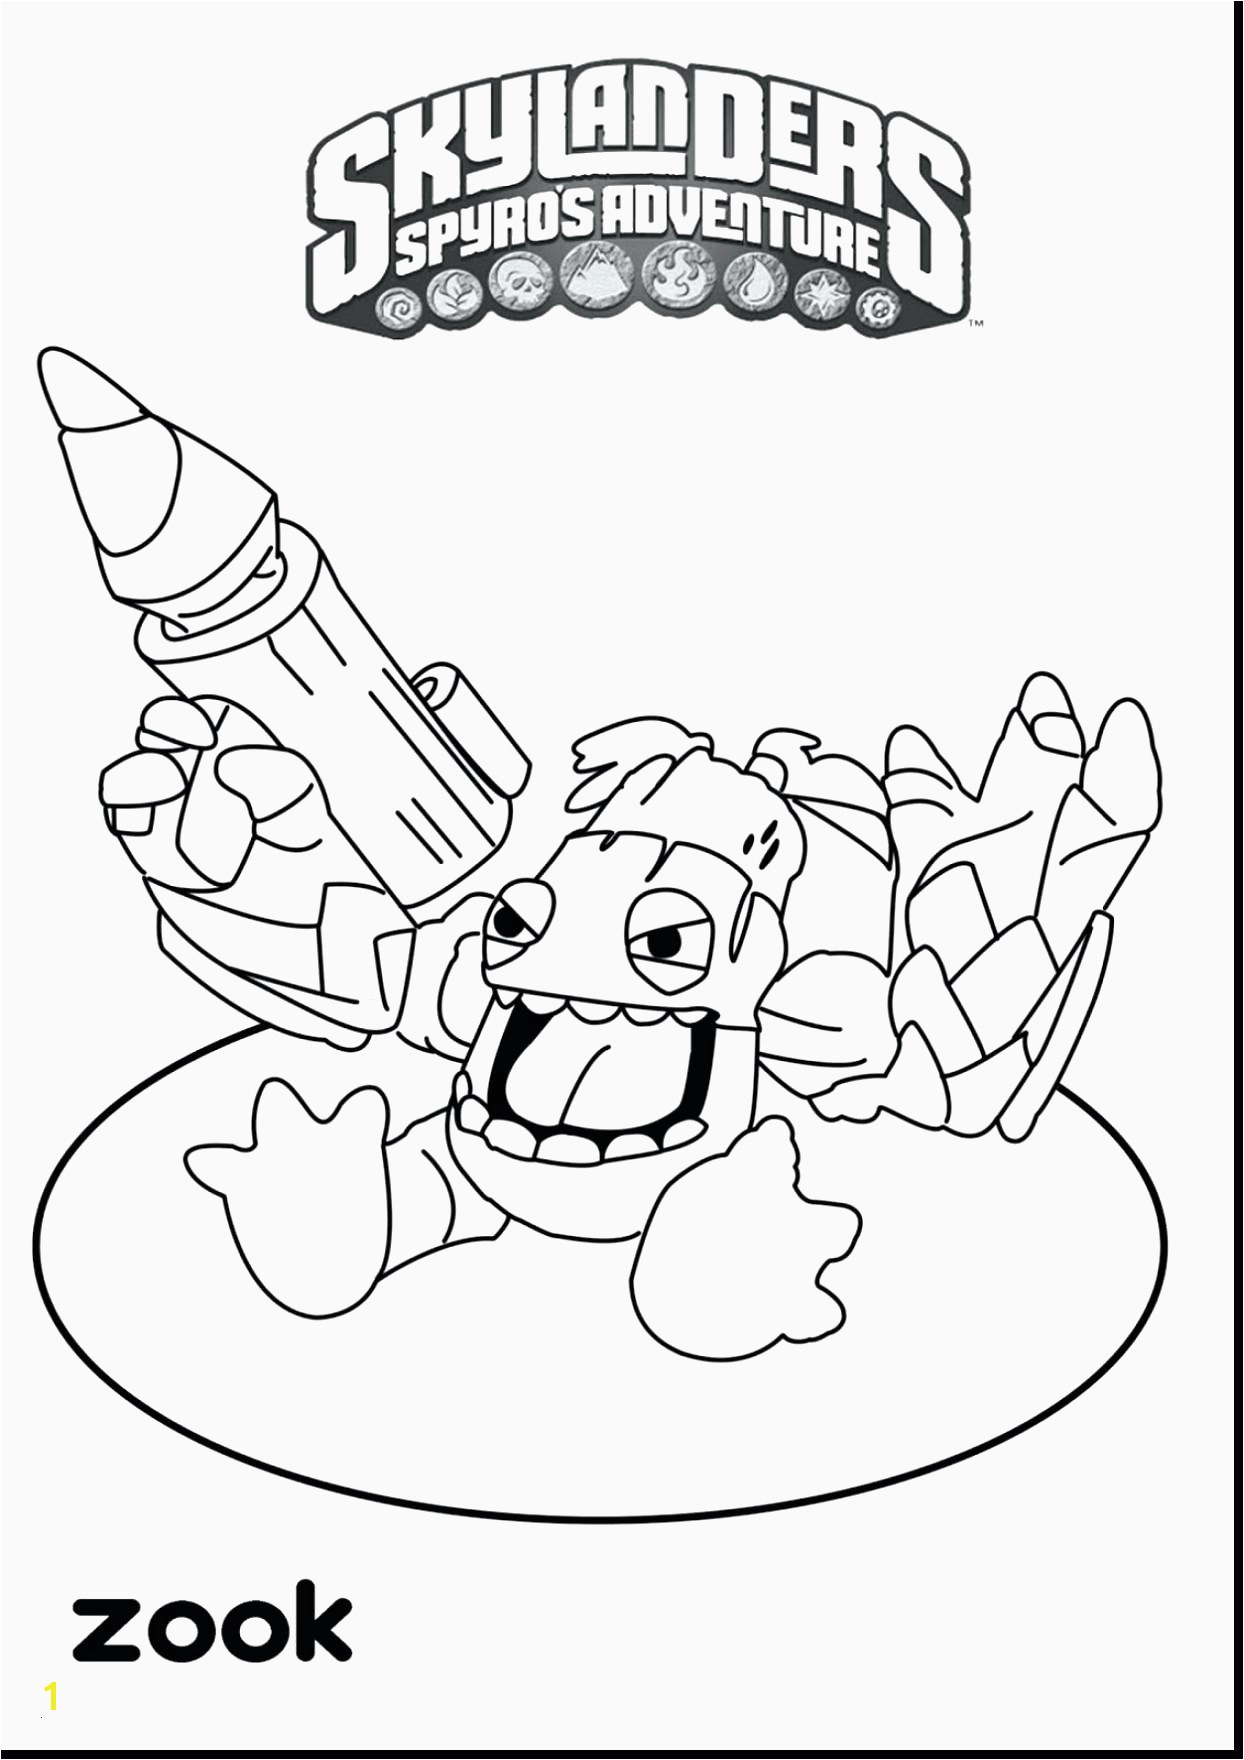 0d Phone Coloring Pages African American Coloring Pages Brilliant Cool Coloring Page Unique